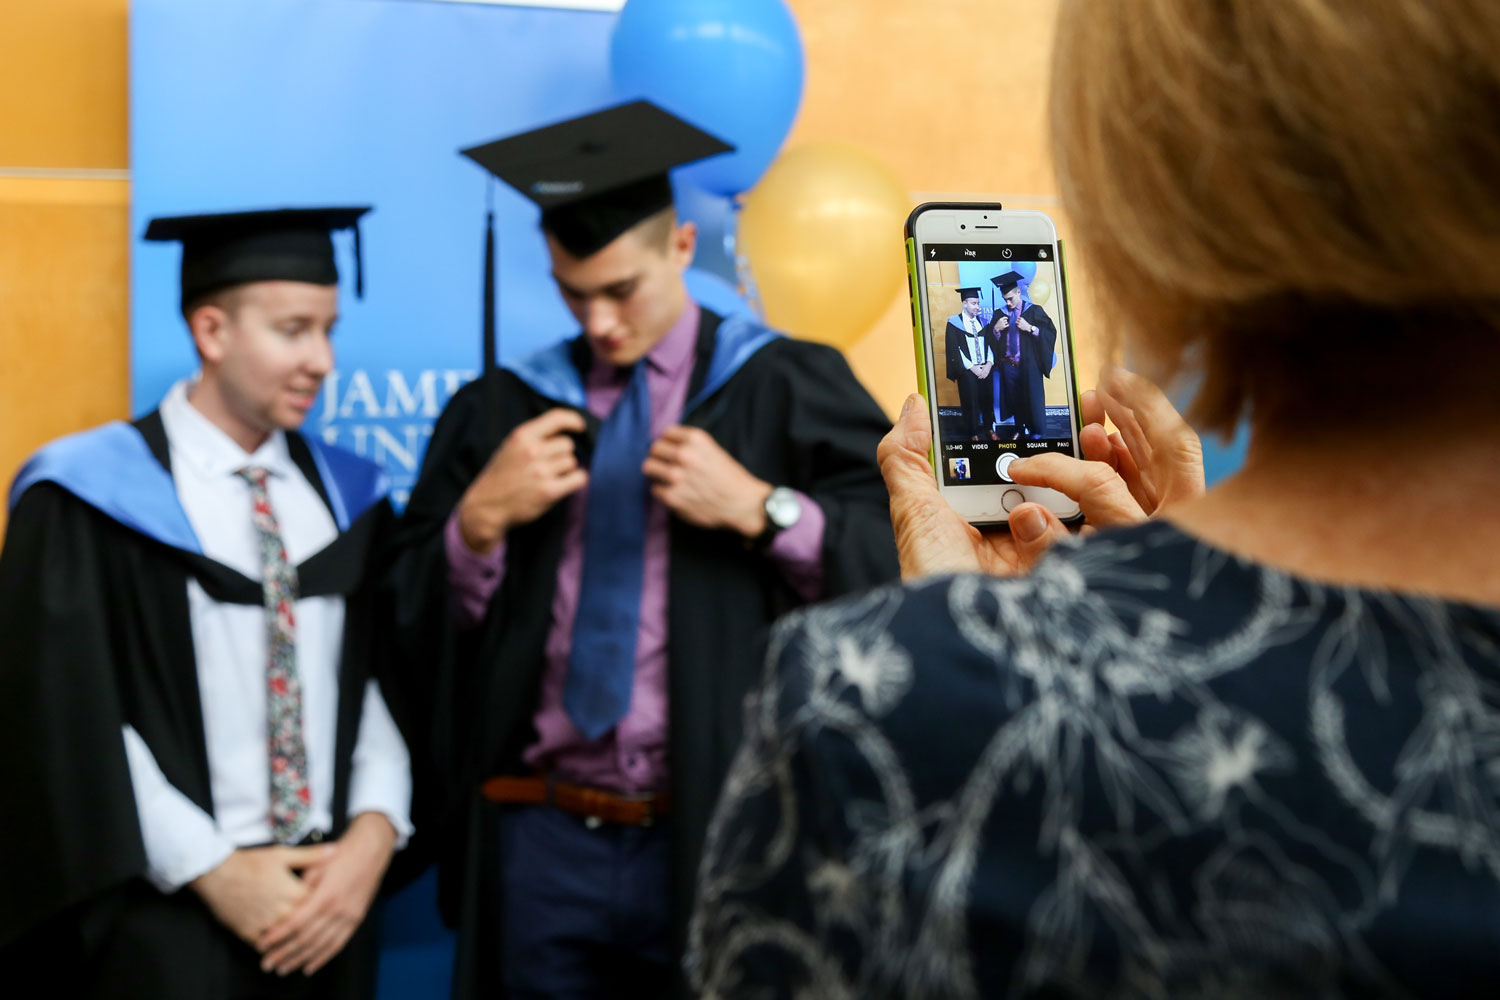 Graduands adjust their gowns as someone takes a photo of them